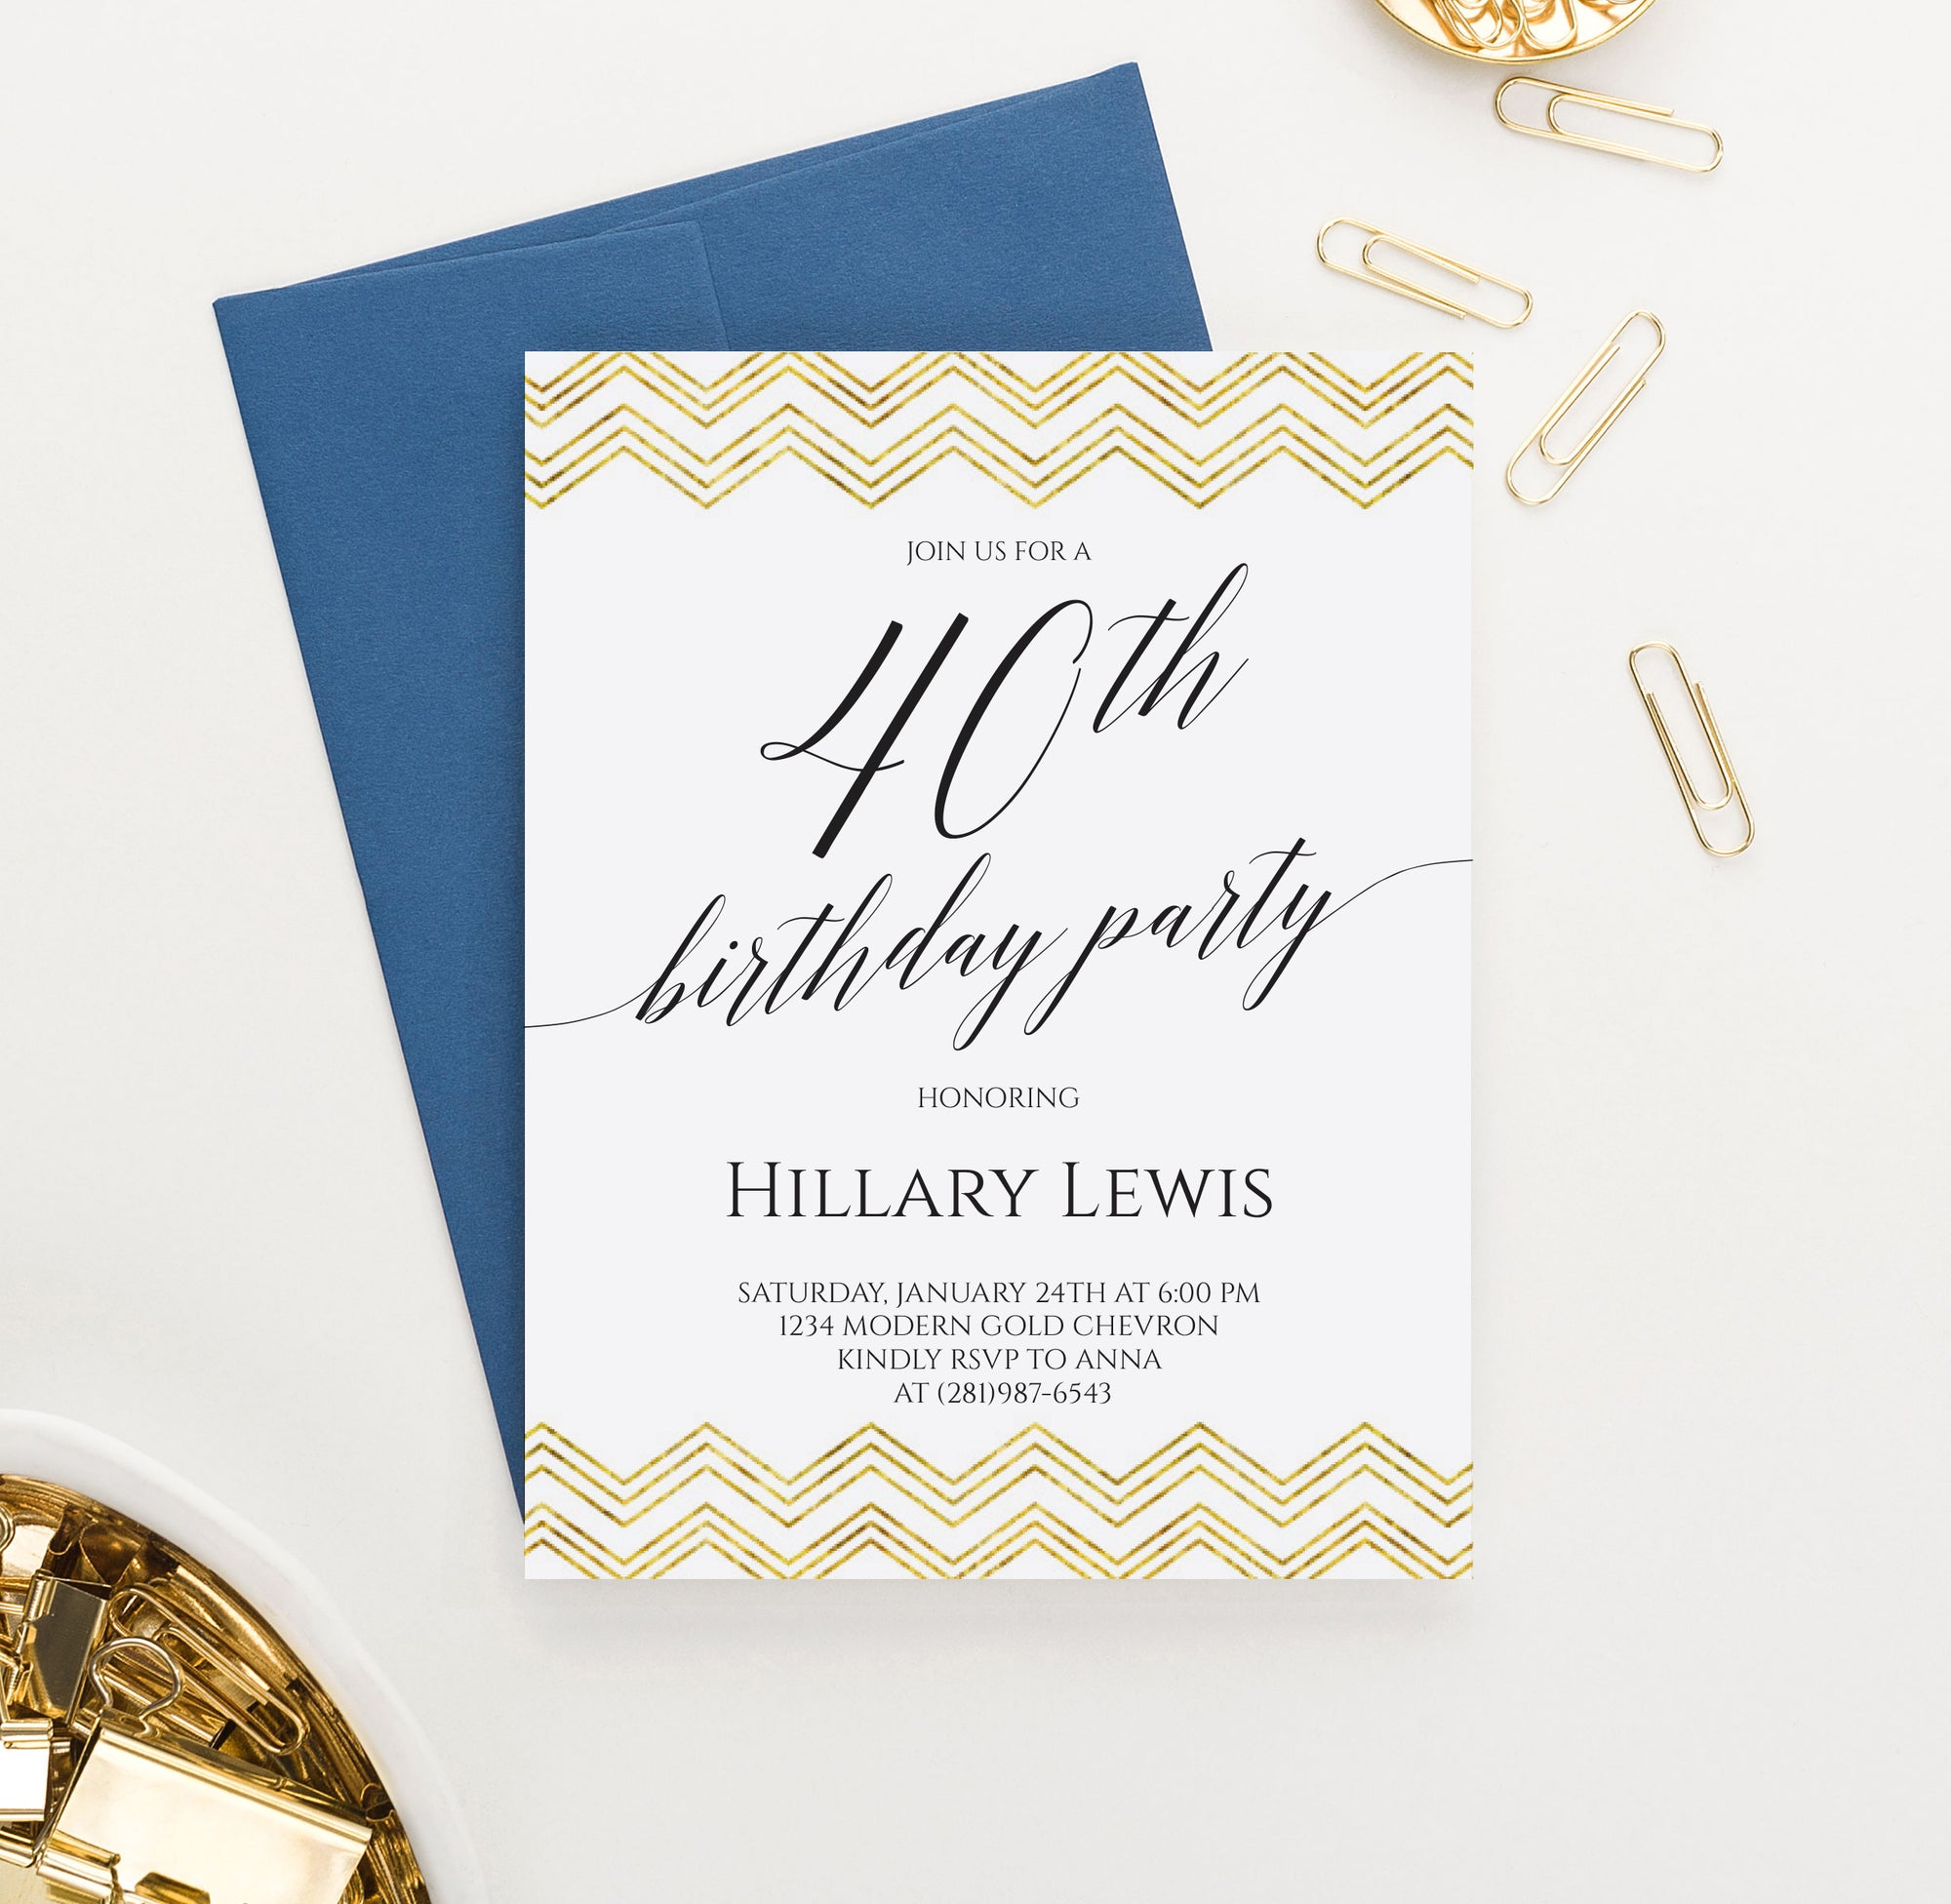 Personalized 40th Birthday Party Invitations With Gold Chevron